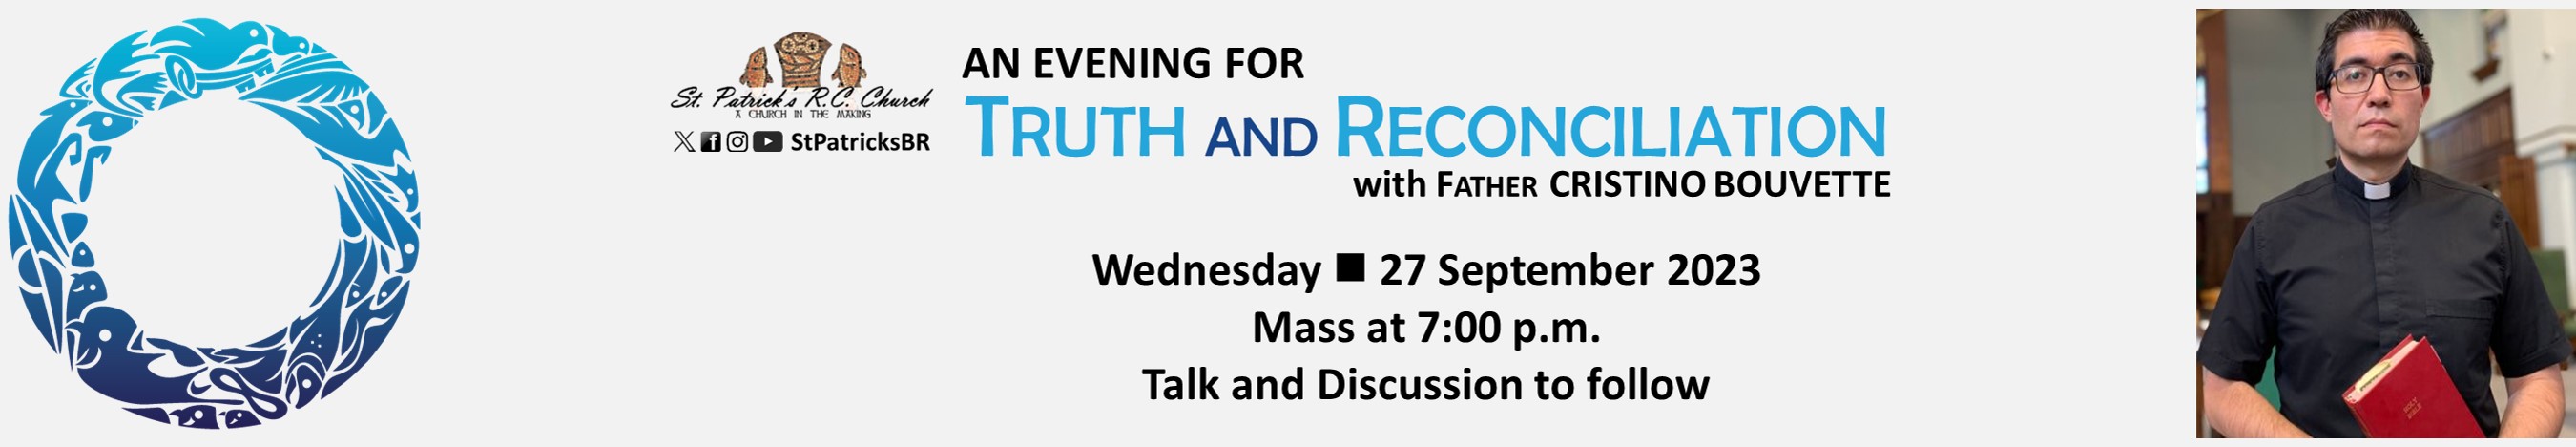 Header: An Evening for Truth and Reconciliation